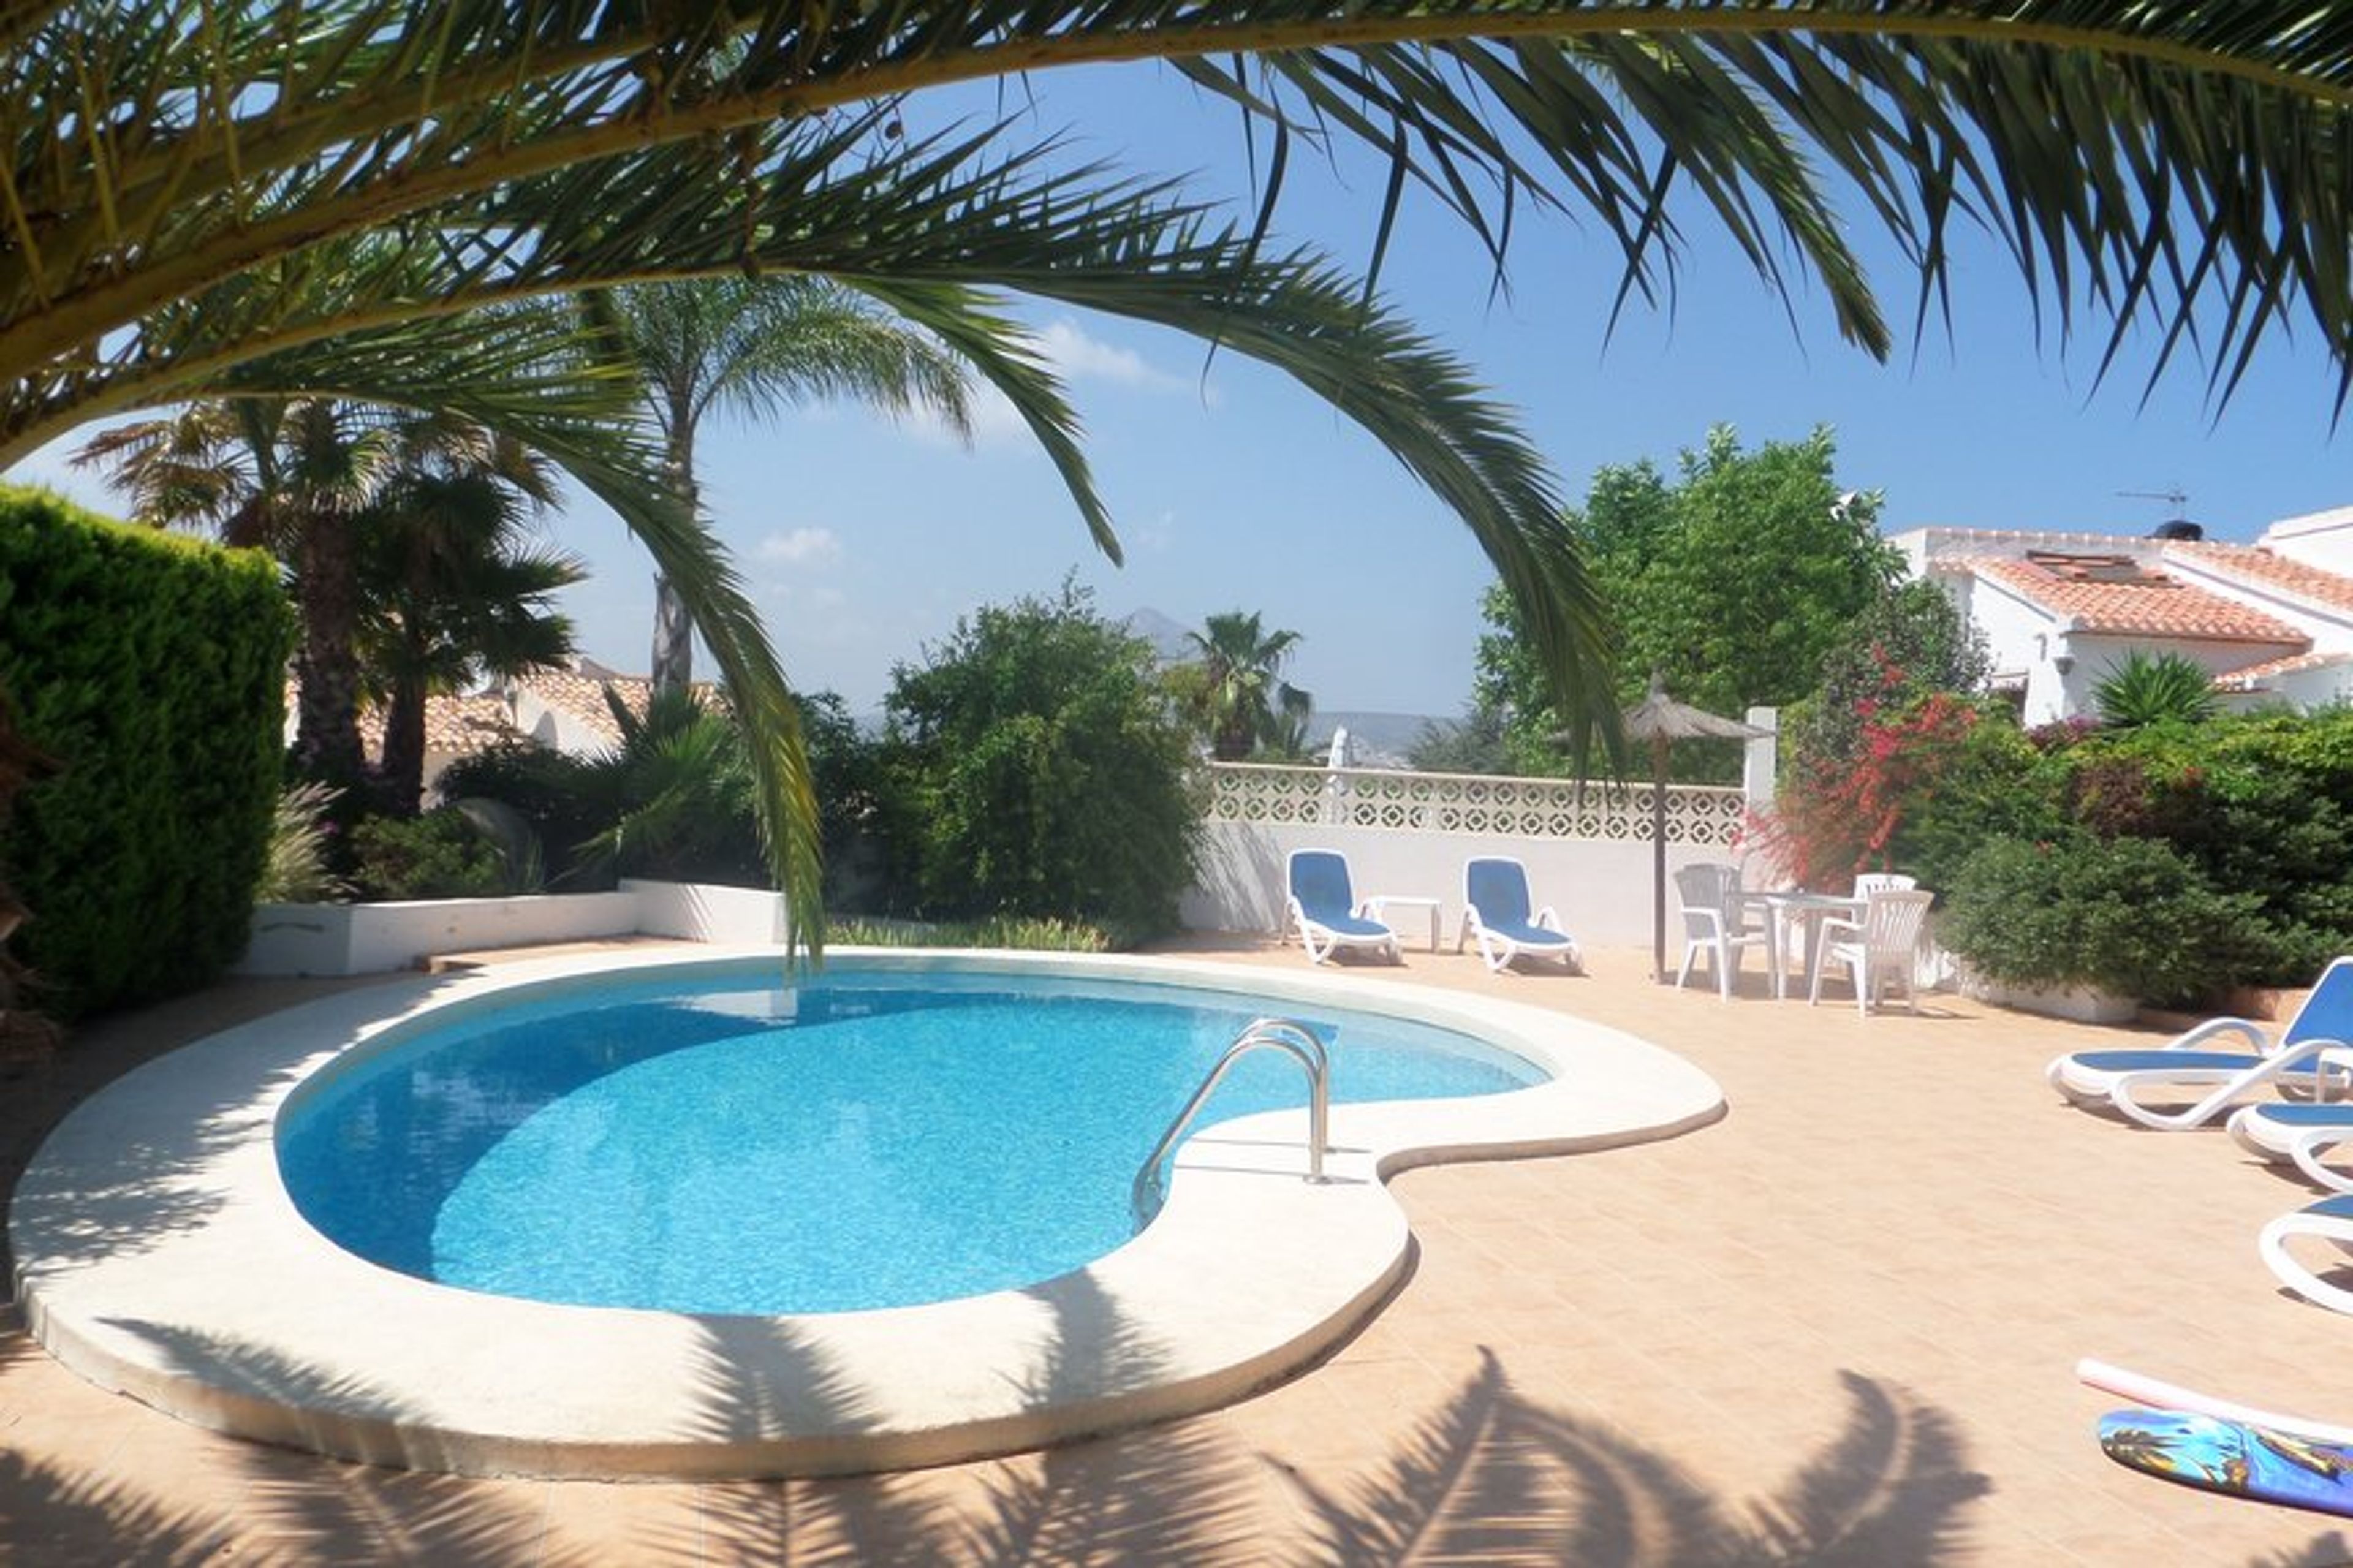 Beautiful private pool, with stunning palm tree & comfortable loungers